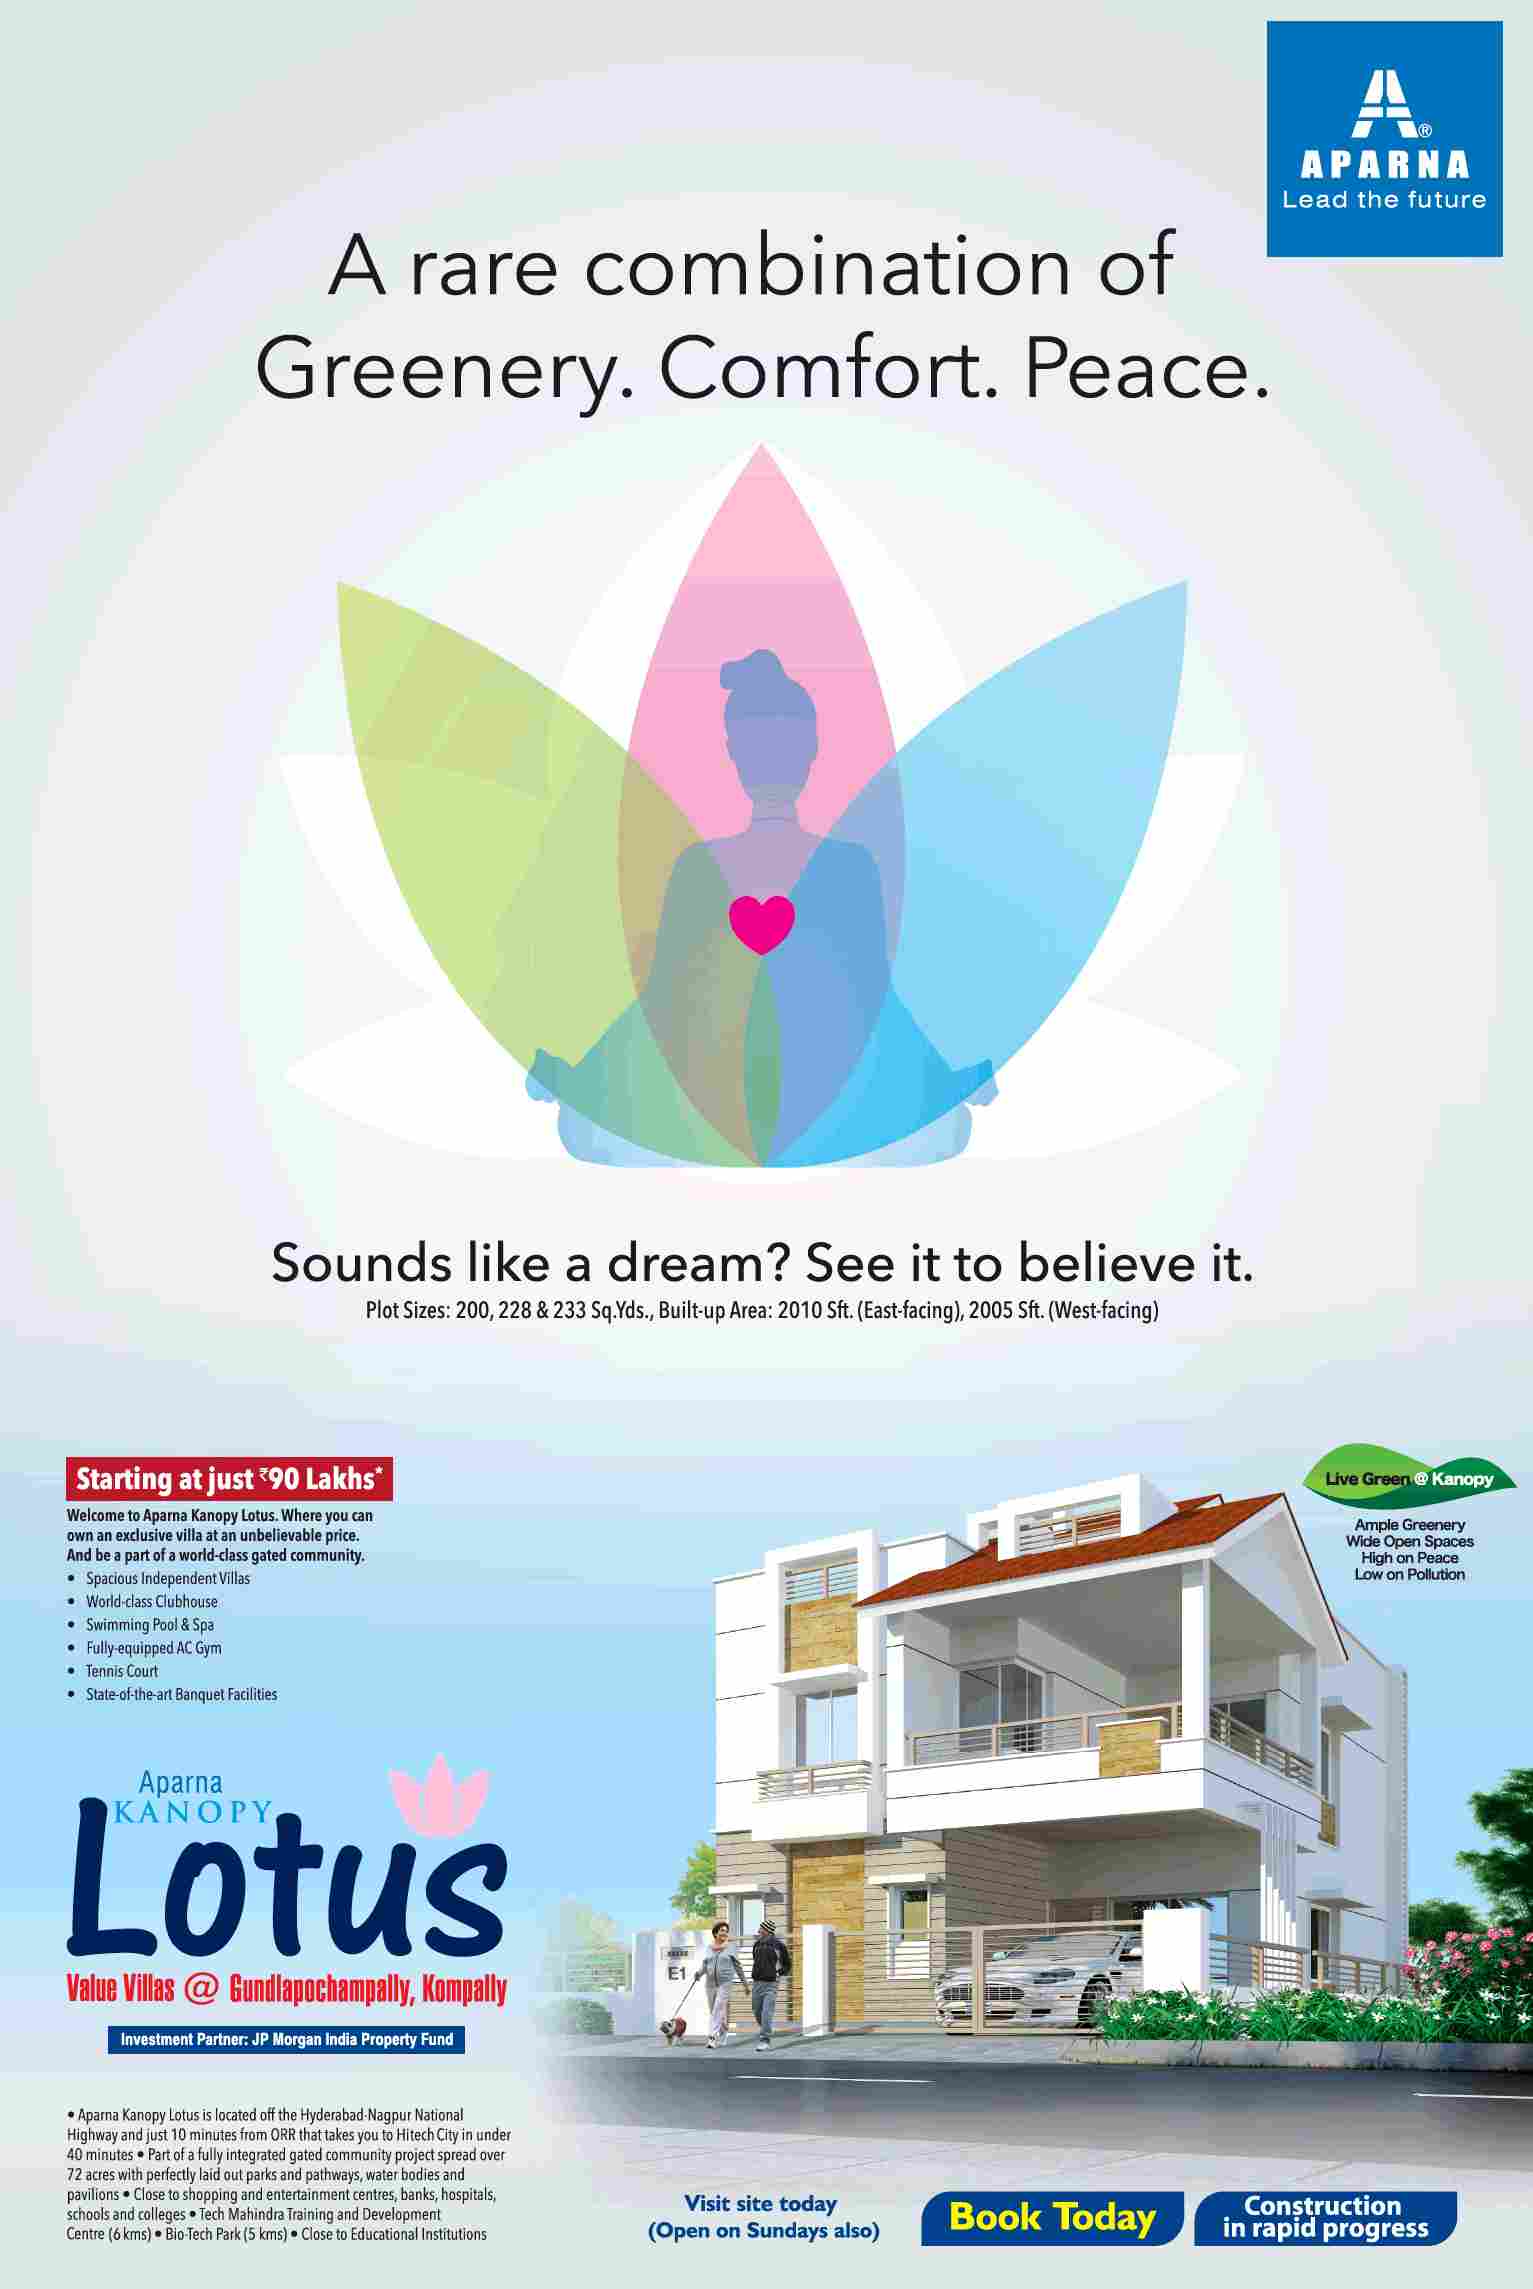 Experience a rare combination of greenery, comfort & peace at Aparna Kanopy Lotus in Hyderabad Update